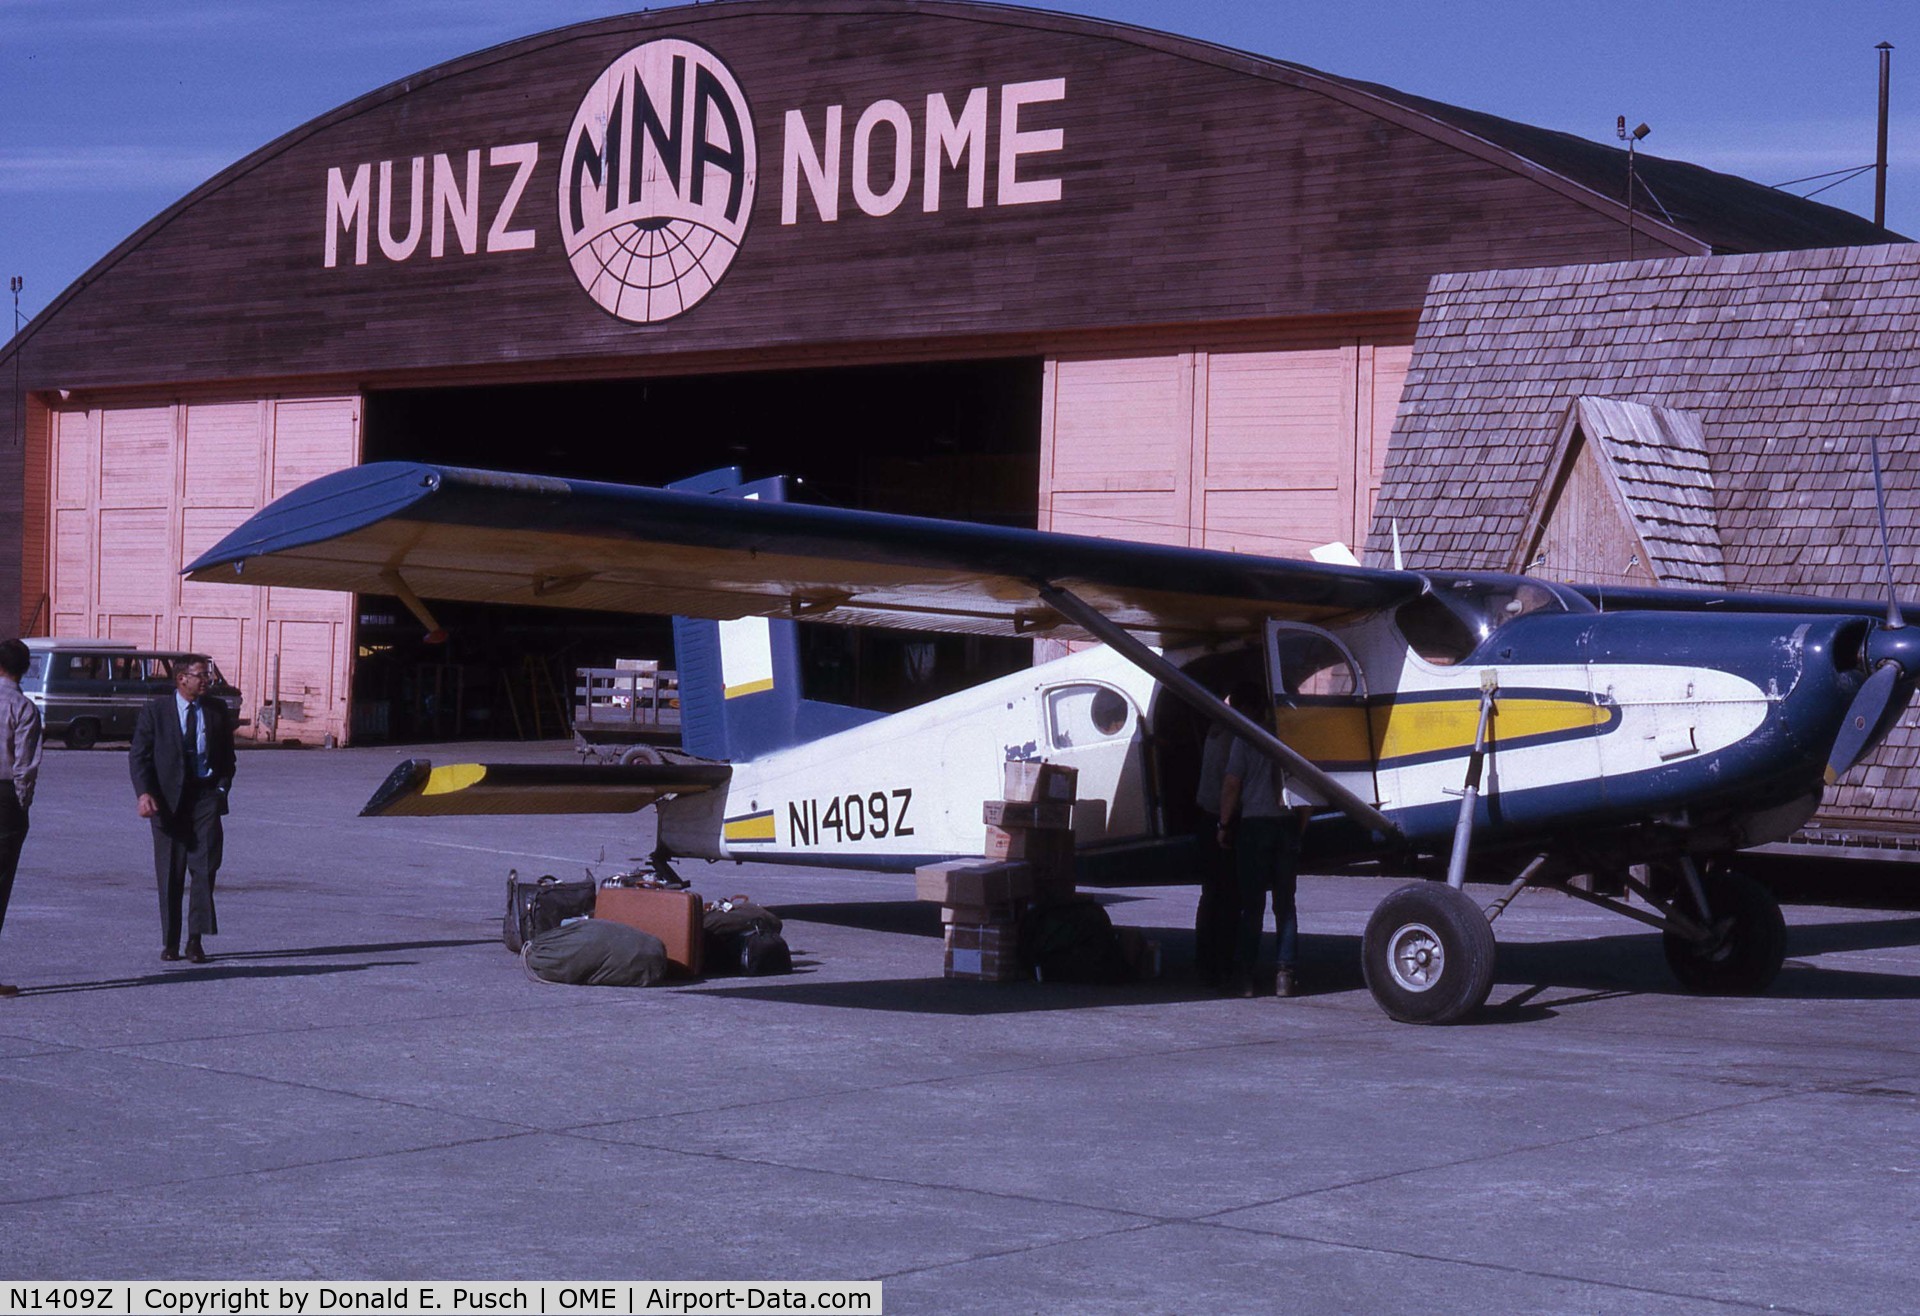 N1409Z, 1961 Pilatus PC-6 C/N 522, Pilatus PC-6 operated by Munz Northern Airlines. Photo taken in August 1970